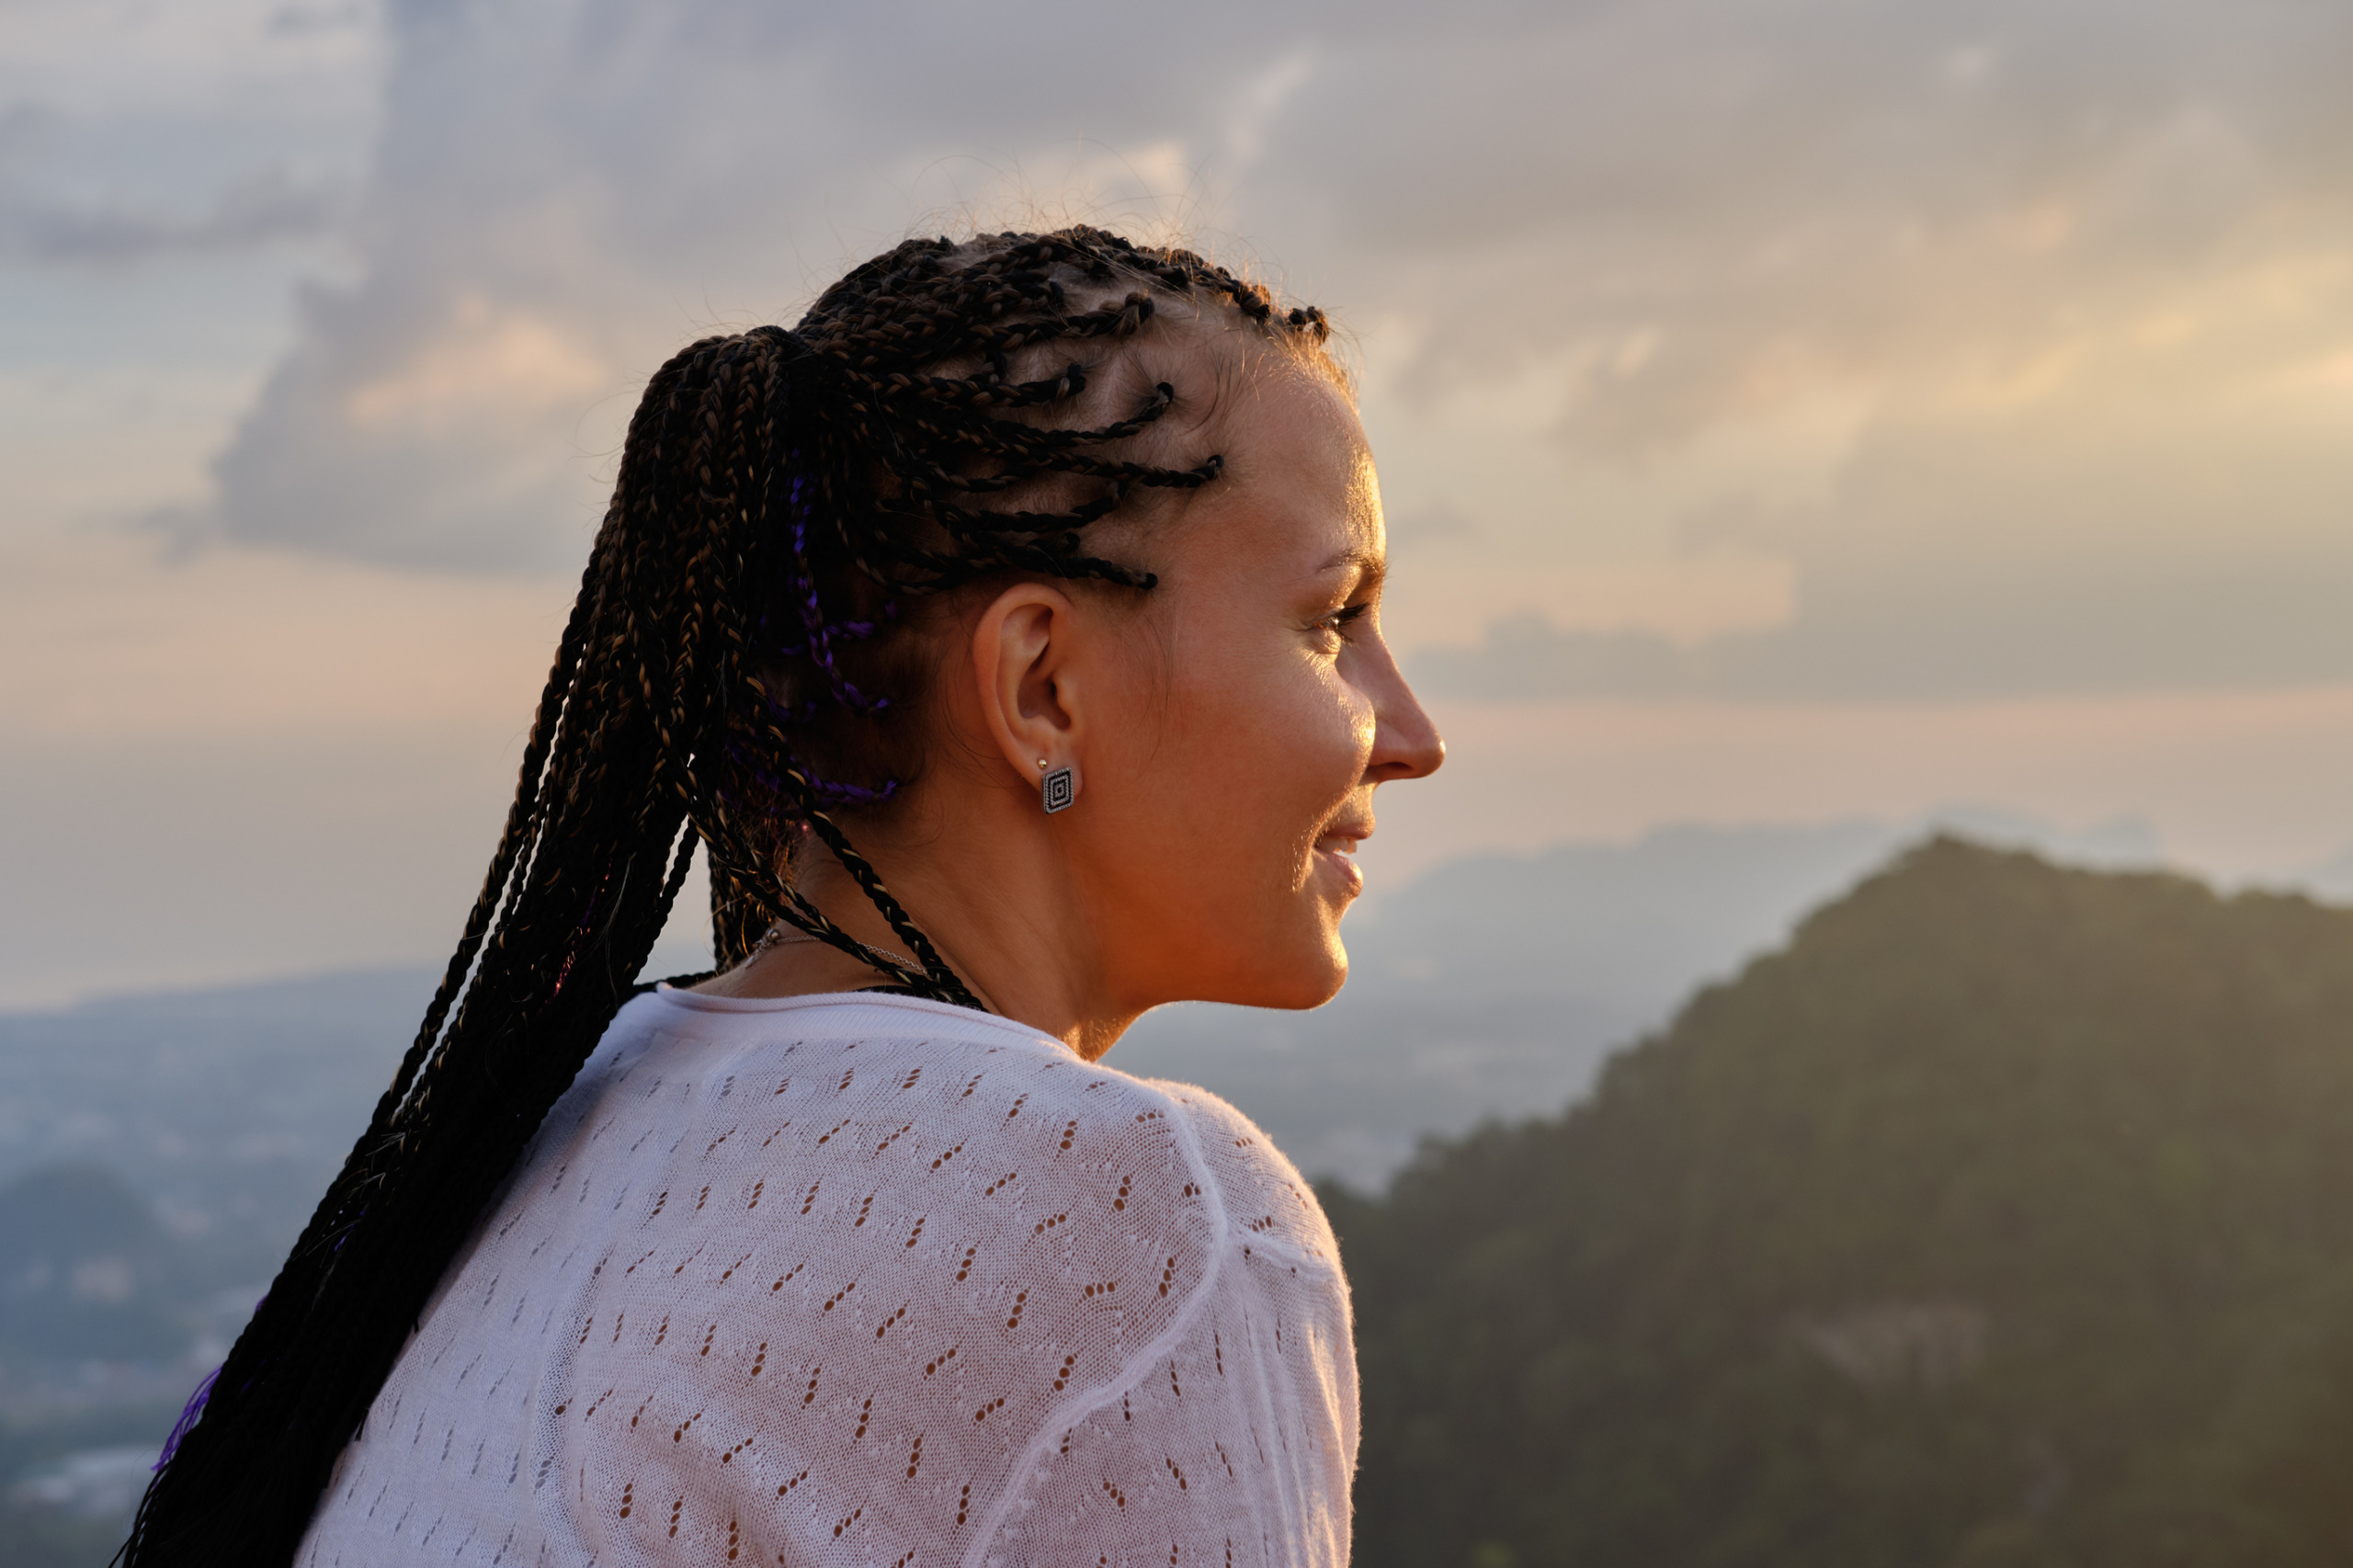 woman with tight braids